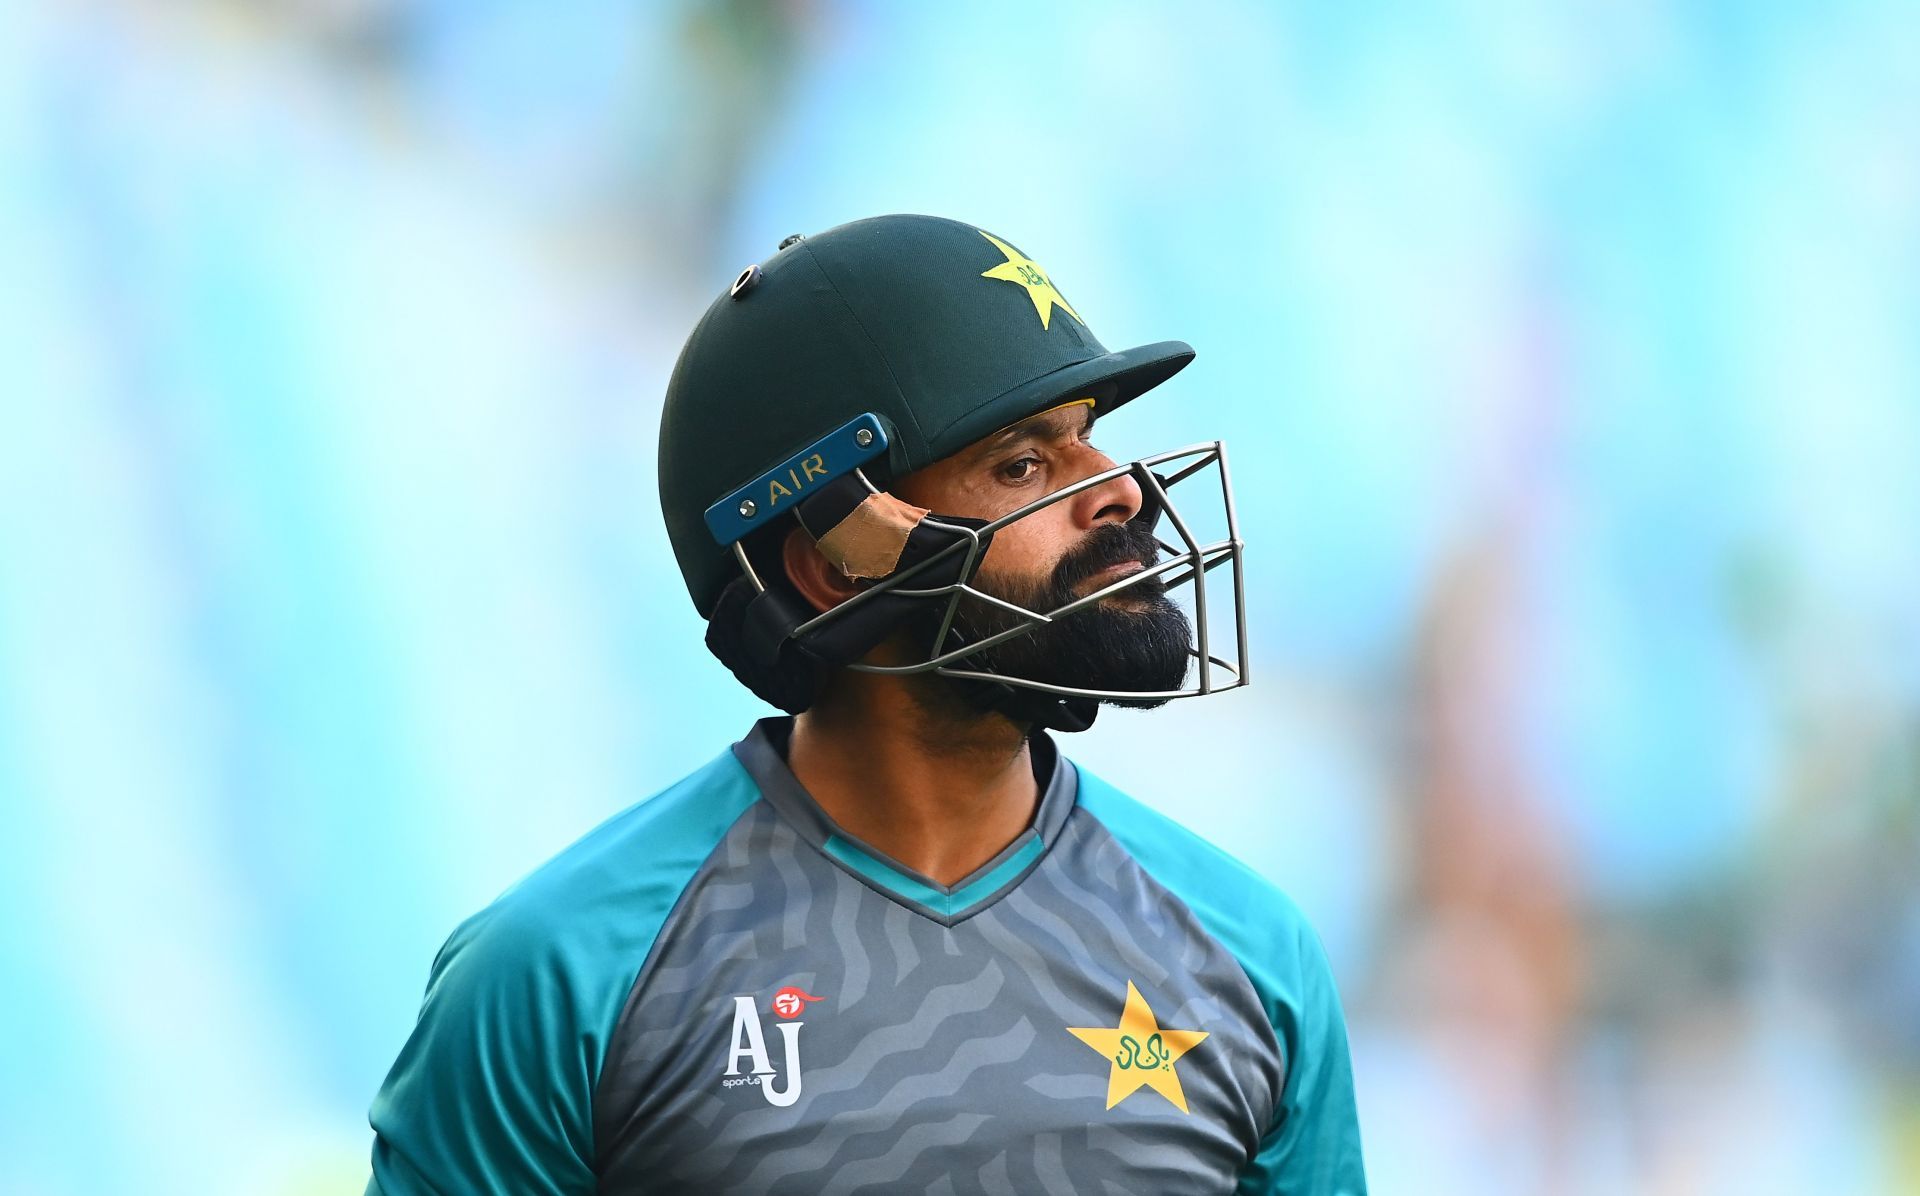 Mohammad Hafeez revealed what he has been up to after international retirement.